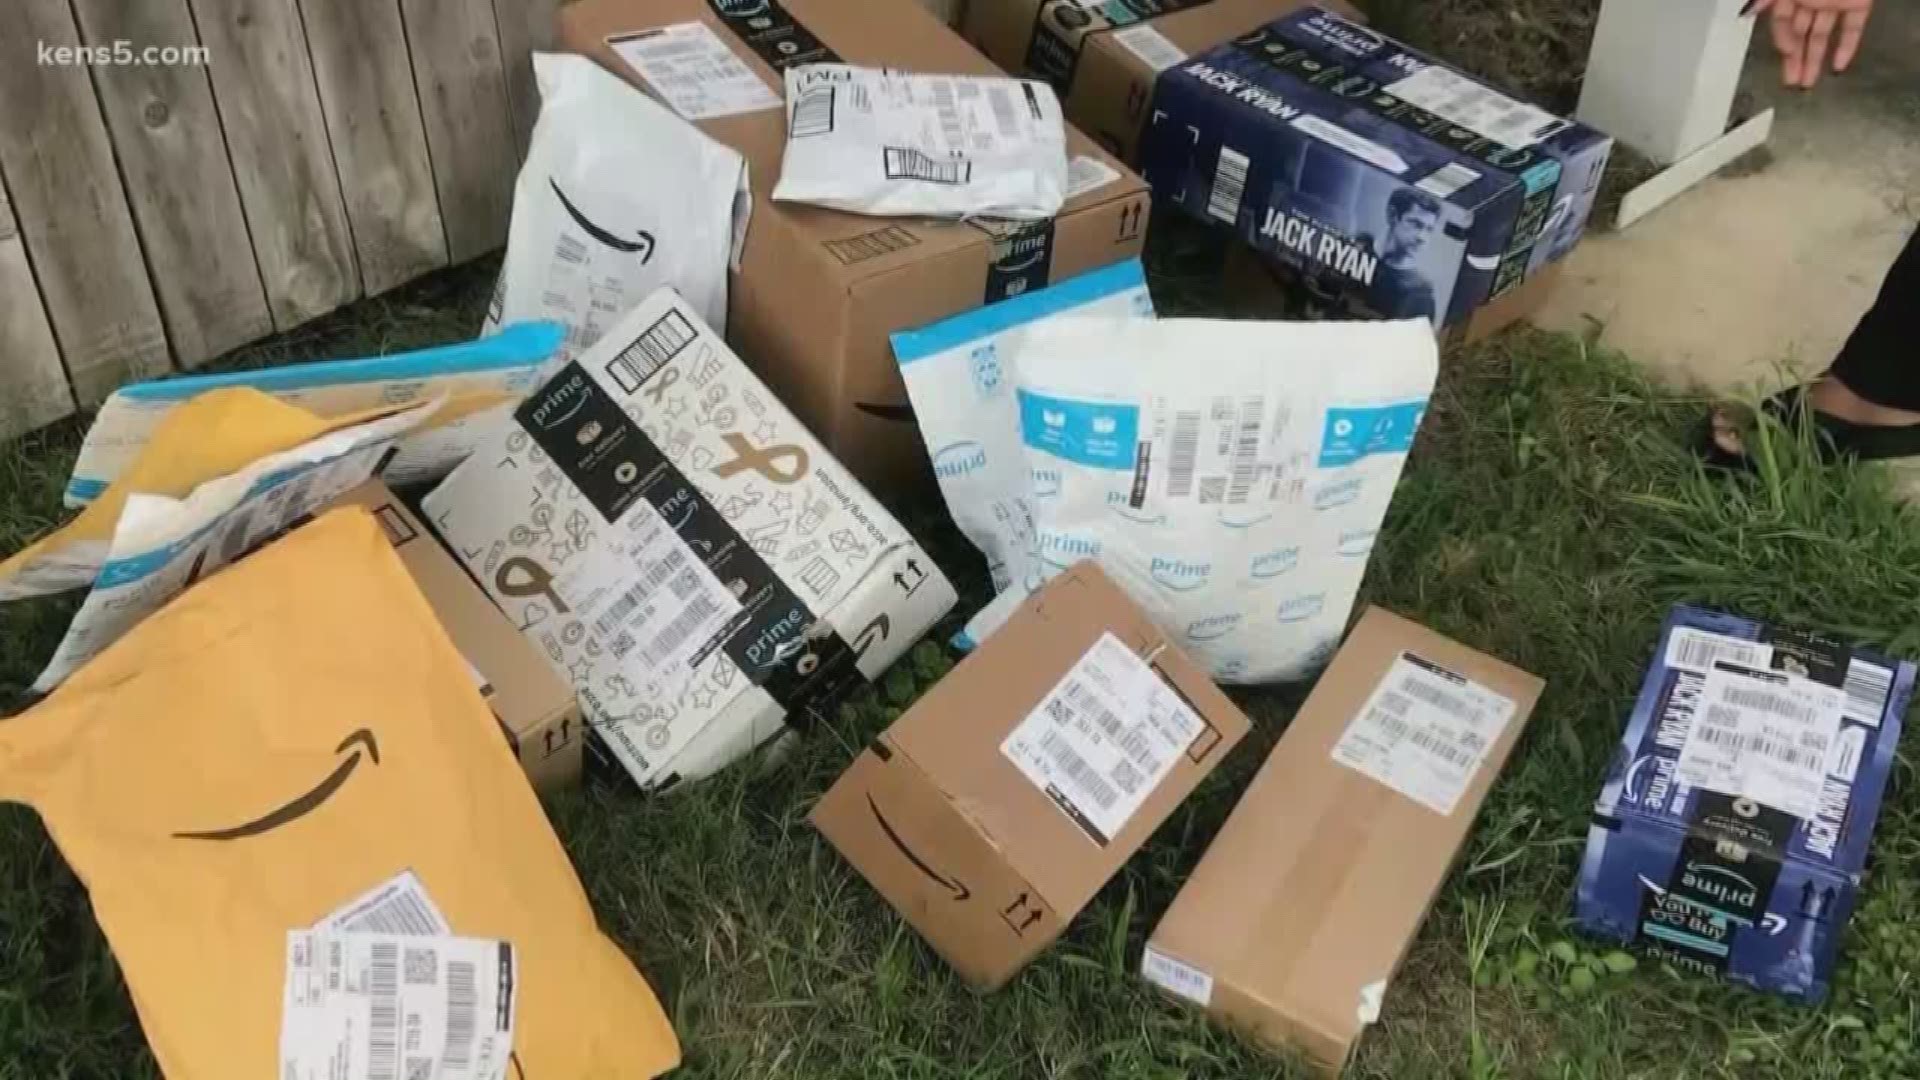 Delivery driver dumps nearly 200 